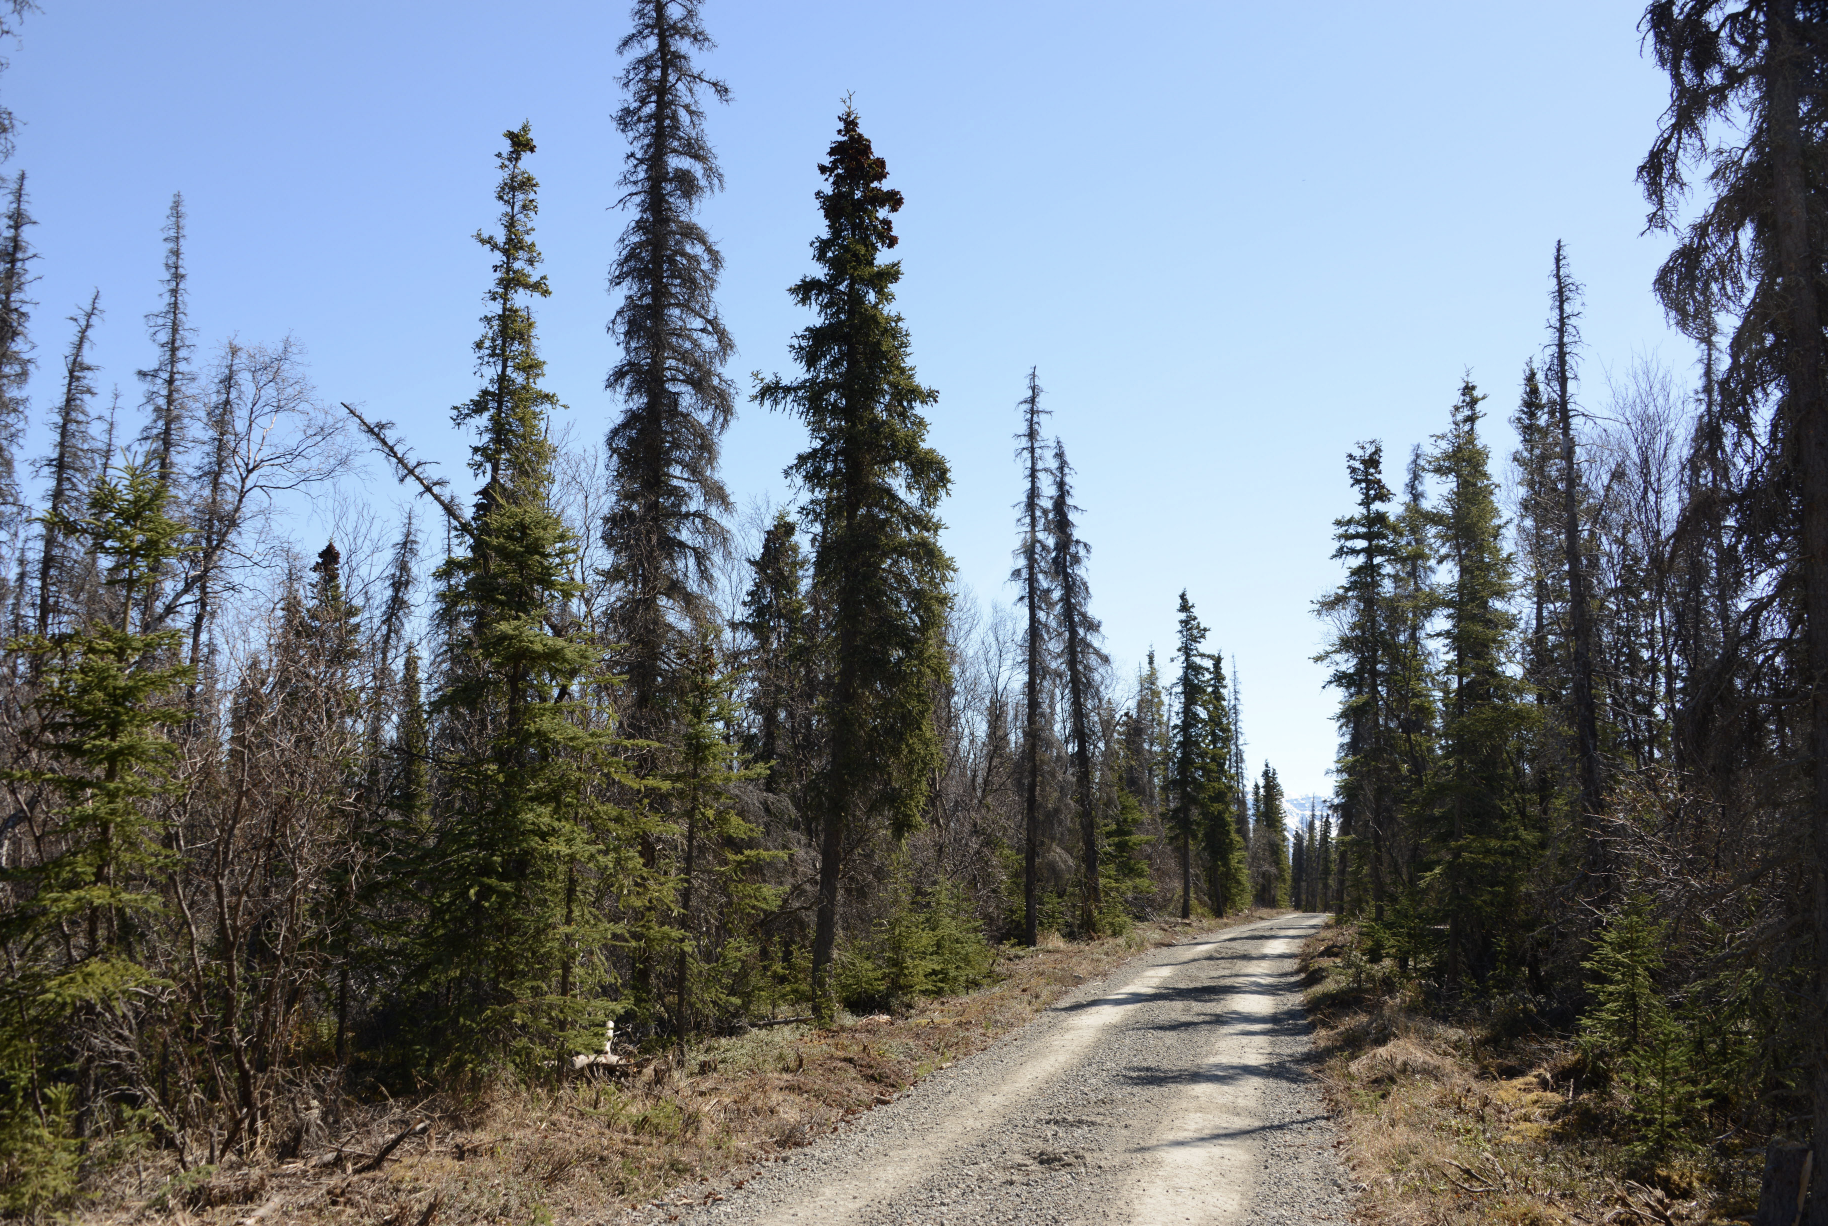 A flat gravel road surrounded by trees